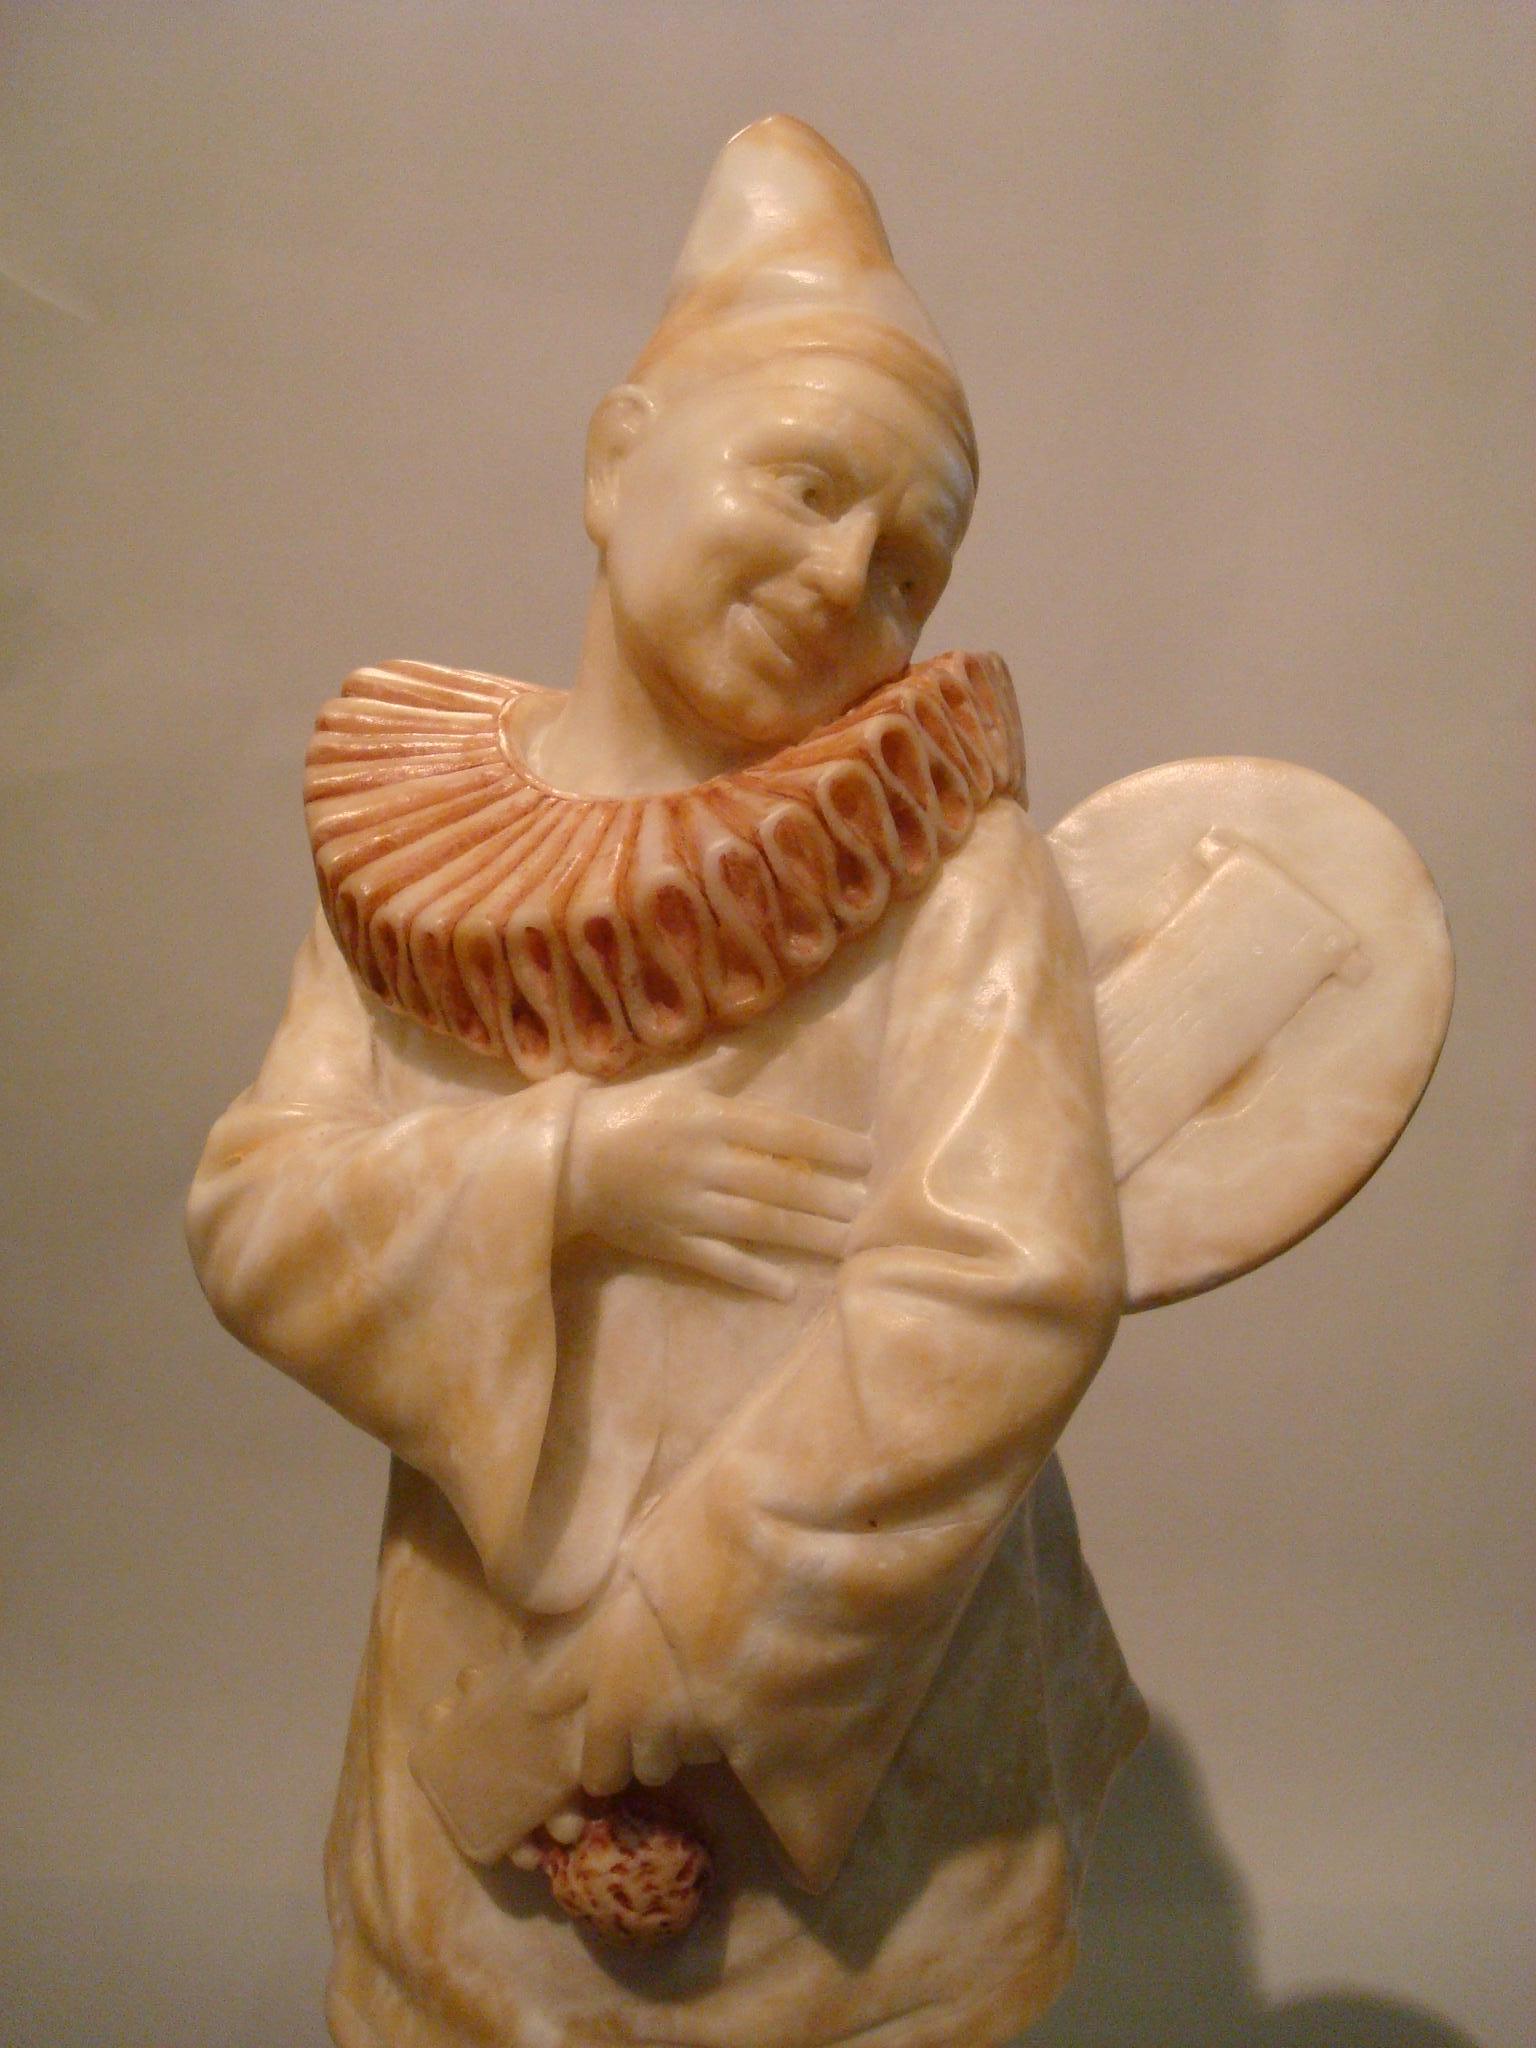 Art Deco signed Alabaster pierrot clown sculpture.
Pierrot sculpture playing the mandolin.

The figure is signed, but i cannot read what it says.
 